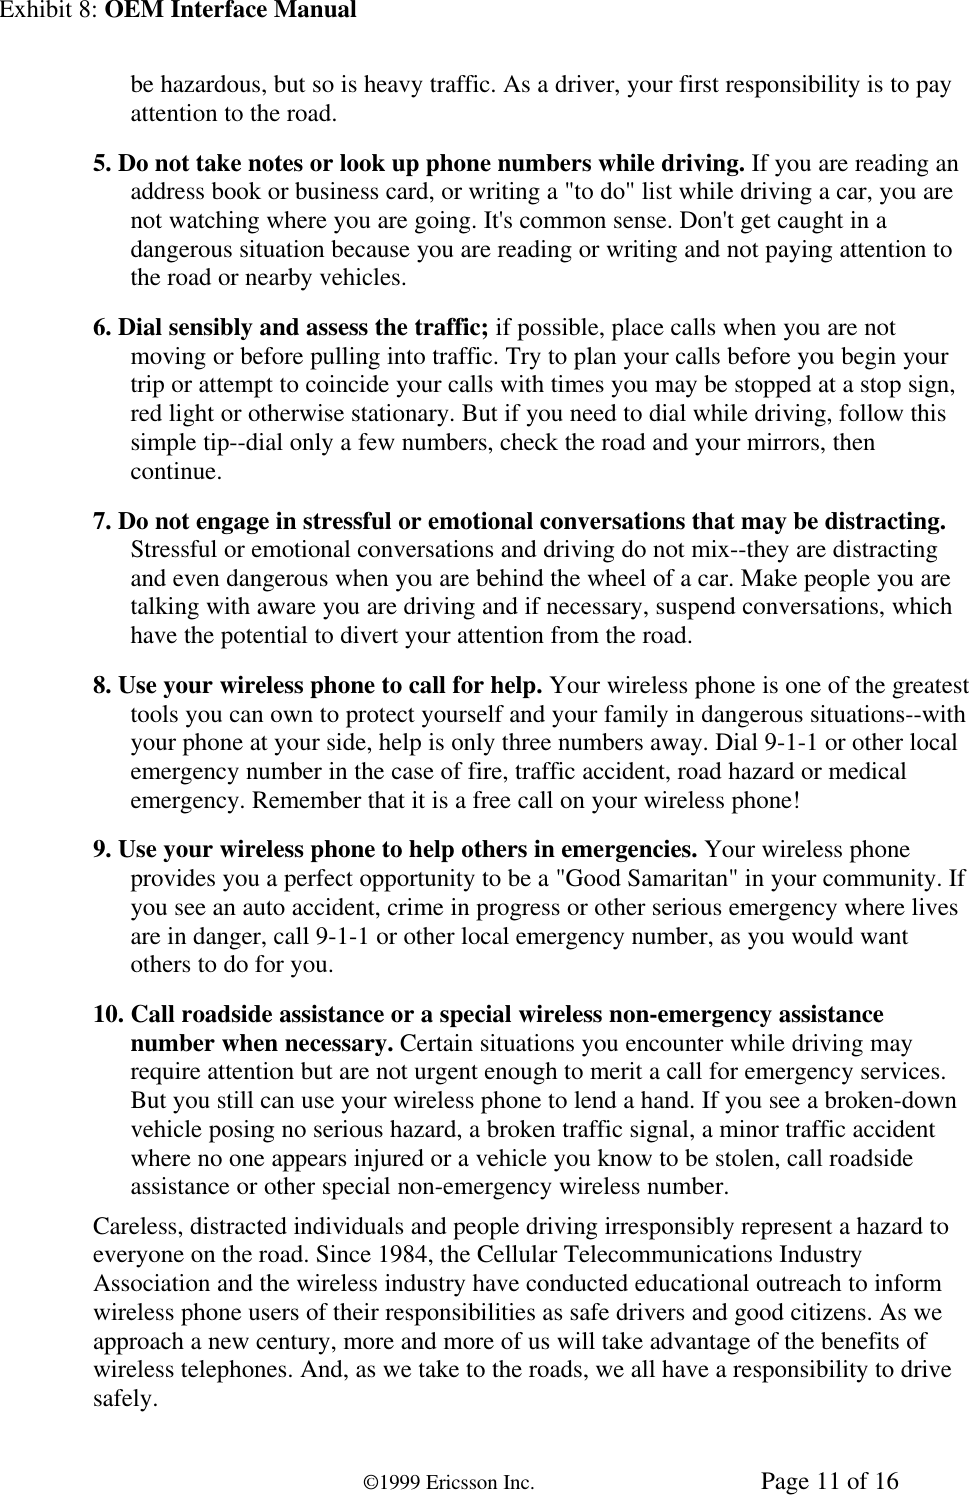 Exhibit 8: OEM Interface Manual©1999 Ericsson Inc. Page 11 of 16be hazardous, but so is heavy traffic. As a driver, your first responsibility is to payattention to the road.5. Do not take notes or look up phone numbers while driving. If you are reading anaddress book or business card, or writing a &quot;to do&quot; list while driving a car, you arenot watching where you are going. It&apos;s common sense. Don&apos;t get caught in adangerous situation because you are reading or writing and not paying attention tothe road or nearby vehicles.6. Dial sensibly and assess the traffic; if possible, place calls when you are notmoving or before pulling into traffic. Try to plan your calls before you begin yourtrip or attempt to coincide your calls with times you may be stopped at a stop sign,red light or otherwise stationary. But if you need to dial while driving, follow thissimple tip--dial only a few numbers, check the road and your mirrors, thencontinue.7. Do not engage in stressful or emotional conversations that may be distracting.Stressful or emotional conversations and driving do not mix--they are distractingand even dangerous when you are behind the wheel of a car. Make people you aretalking with aware you are driving and if necessary, suspend conversations, whichhave the potential to divert your attention from the road.8. Use your wireless phone to call for help. Your wireless phone is one of the greatesttools you can own to protect yourself and your family in dangerous situations--withyour phone at your side, help is only three numbers away. Dial 9-1-1 or other localemergency number in the case of fire, traffic accident, road hazard or medicalemergency. Remember that it is a free call on your wireless phone!9. Use your wireless phone to help others in emergencies. Your wireless phoneprovides you a perfect opportunity to be a &quot;Good Samaritan&quot; in your community. Ifyou see an auto accident, crime in progress or other serious emergency where livesare in danger, call 9-1-1 or other local emergency number, as you would wantothers to do for you.10. Call roadside assistance or a special wireless non-emergency assistancenumber when necessary. Certain situations you encounter while driving mayrequire attention but are not urgent enough to merit a call for emergency services.But you still can use your wireless phone to lend a hand. If you see a broken-downvehicle posing no serious hazard, a broken traffic signal, a minor traffic accidentwhere no one appears injured or a vehicle you know to be stolen, call roadsideassistance or other special non-emergency wireless number.Careless, distracted individuals and people driving irresponsibly represent a hazard toeveryone on the road. Since 1984, the Cellular Telecommunications IndustryAssociation and the wireless industry have conducted educational outreach to informwireless phone users of their responsibilities as safe drivers and good citizens. As weapproach a new century, more and more of us will take advantage of the benefits ofwireless telephones. And, as we take to the roads, we all have a responsibility to drivesafely.